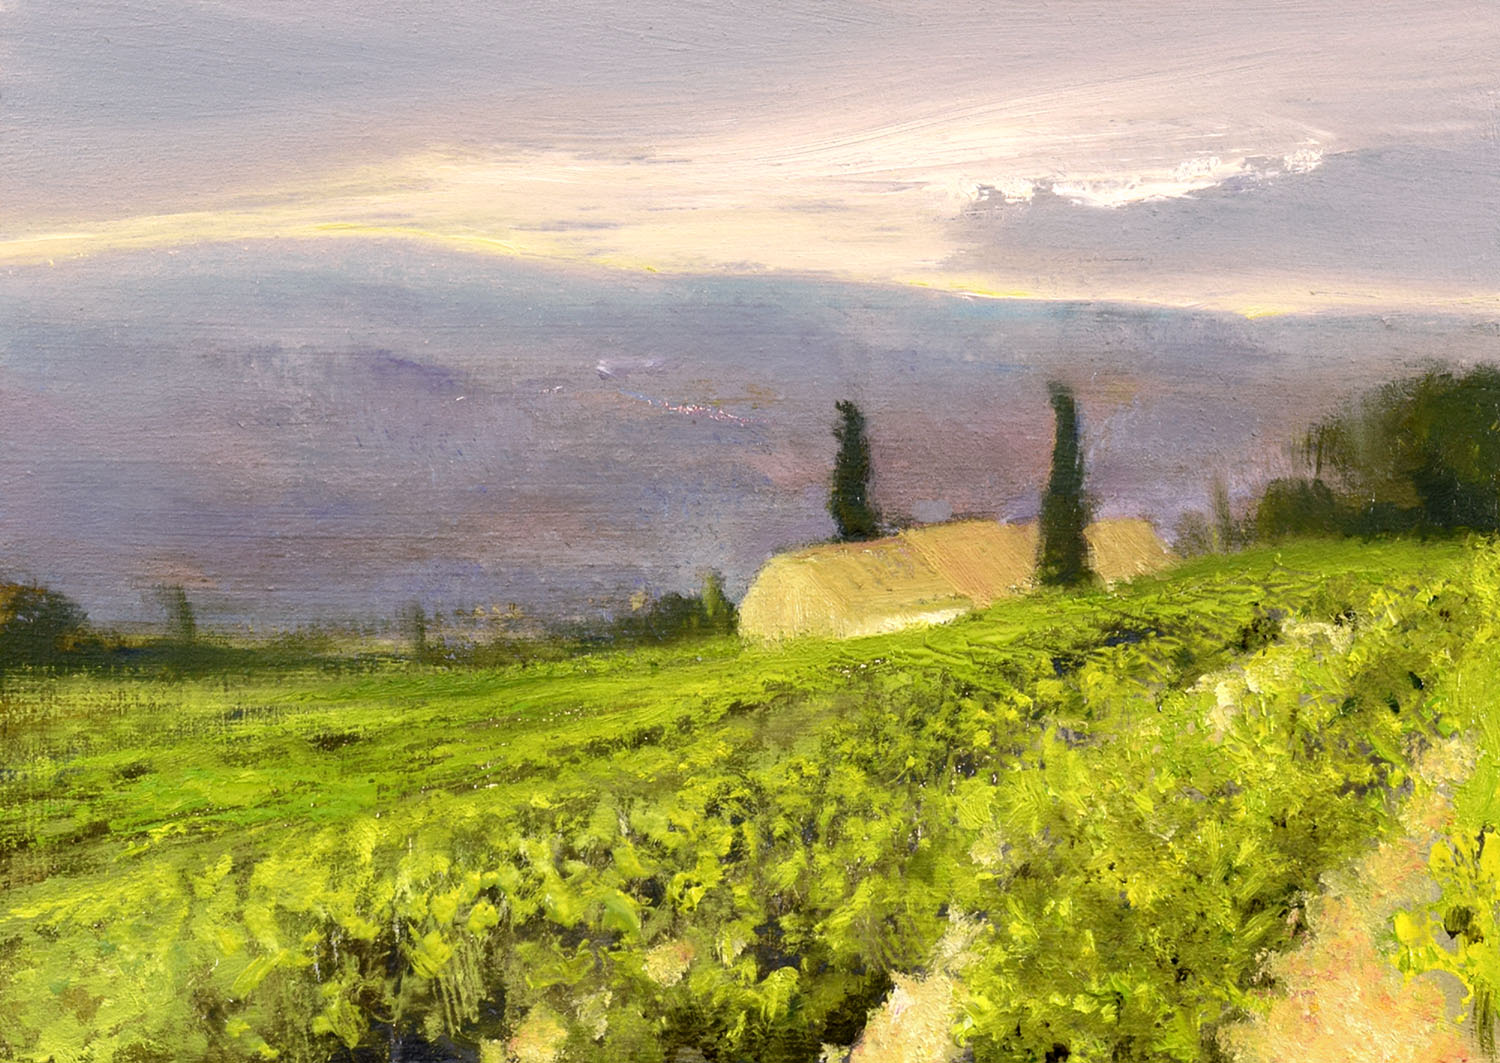 Sunrise in the Vineyards, John O'Grady | A landscape painting of a vineyard in the morning light